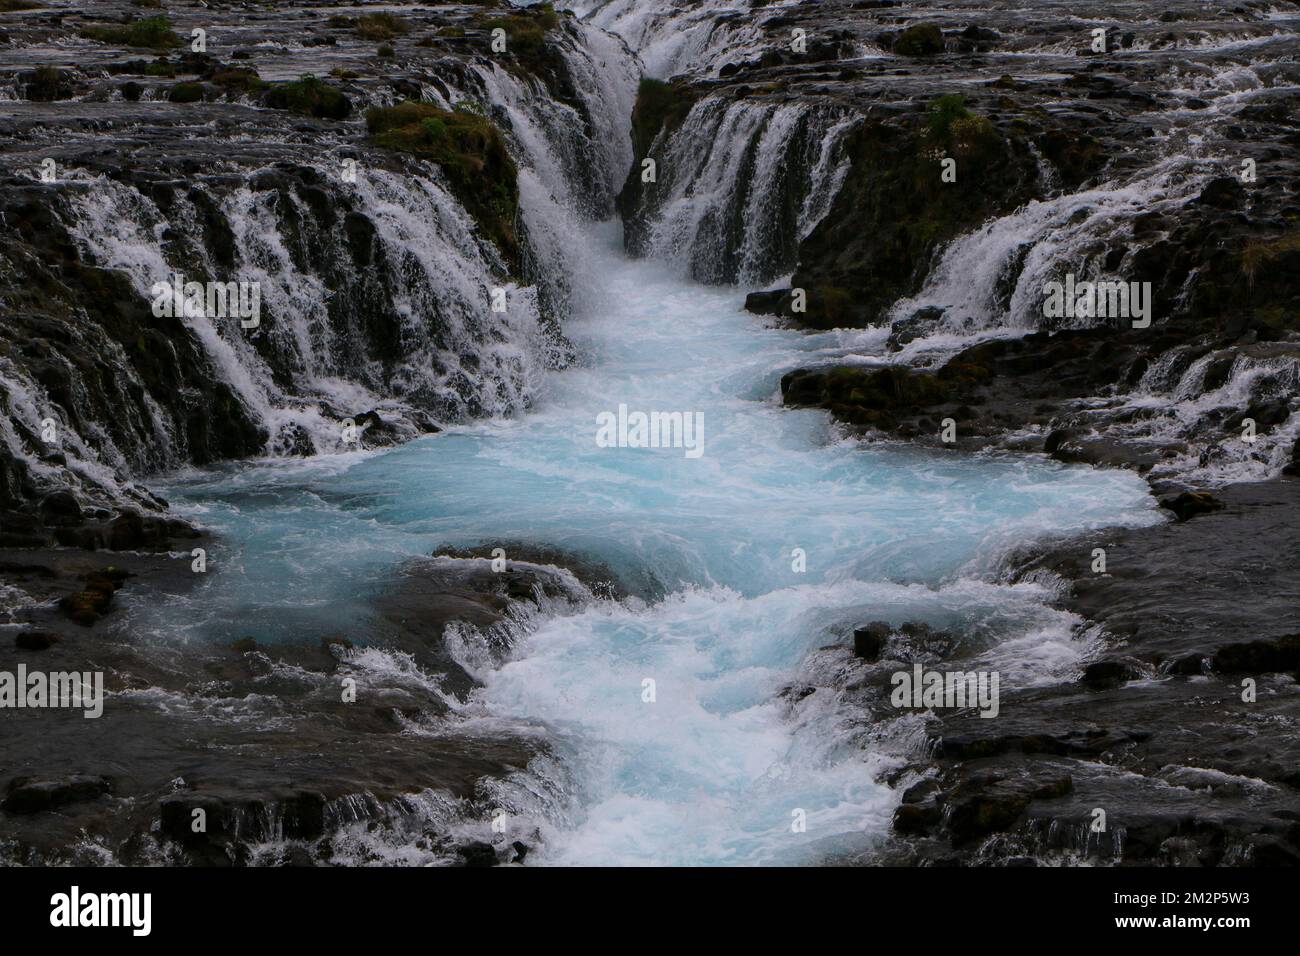 A beautiful scenery of the flowing Bruarfoss waterfall on the Bruara River in Iceland Stock Photo